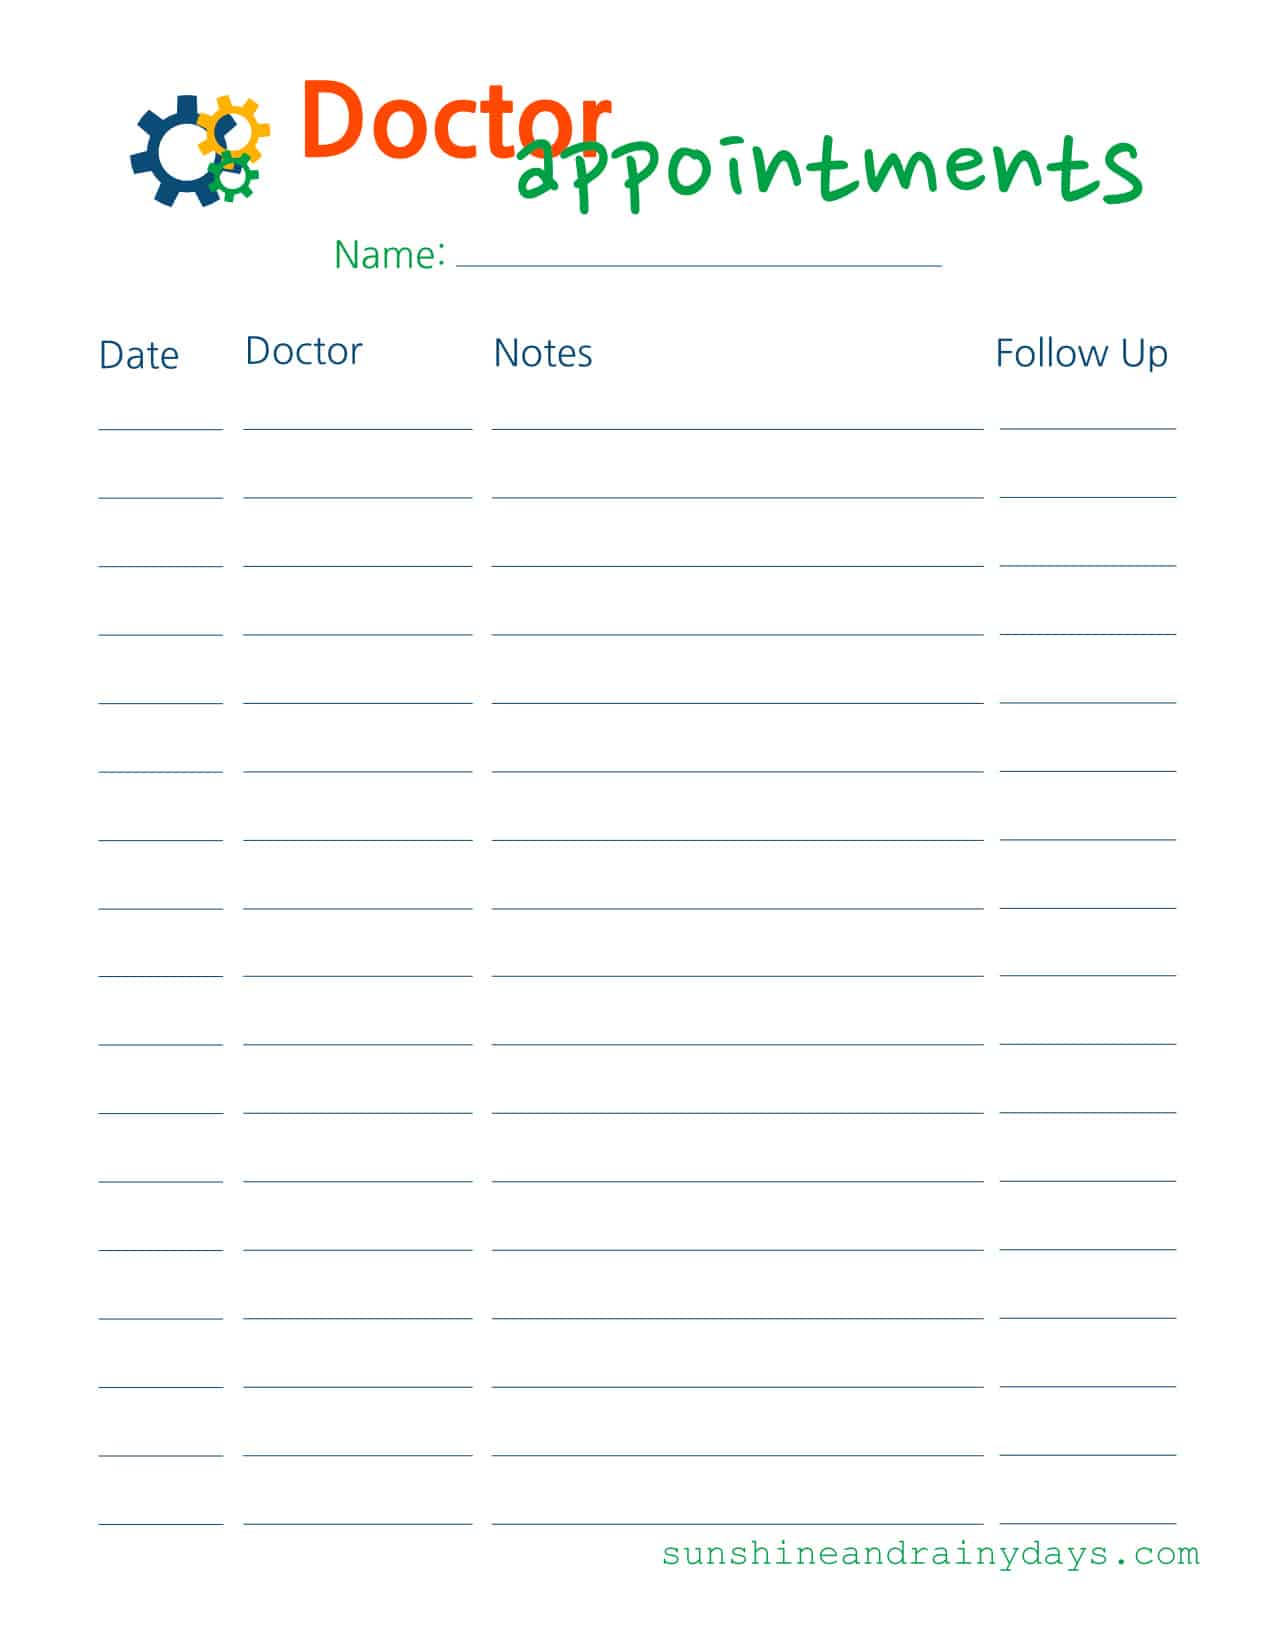 doctor-appointments-free-printable-log-your-doctor-visits-sunshine